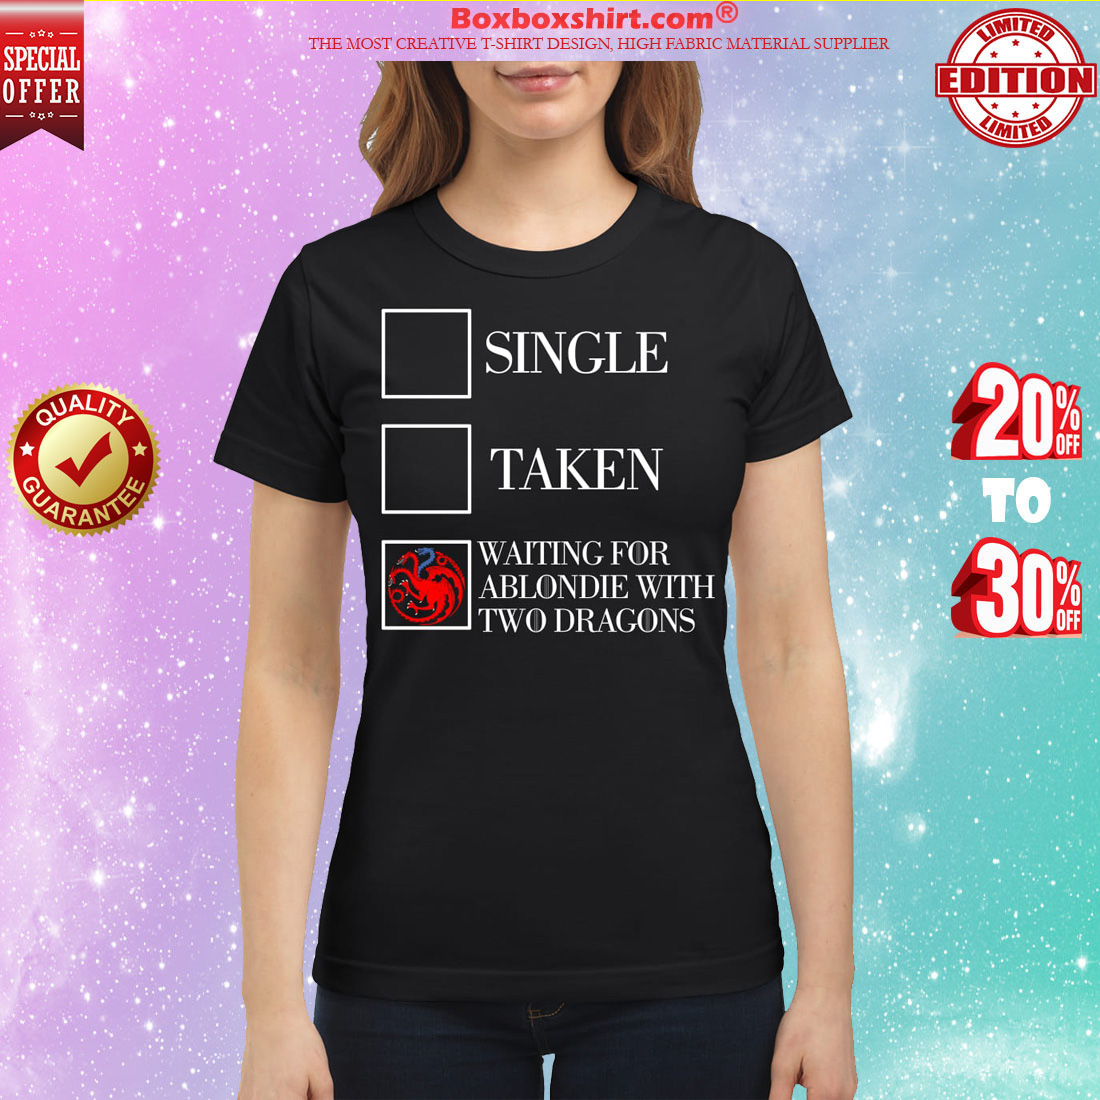 Single taken waiting for a blondie classic shirt